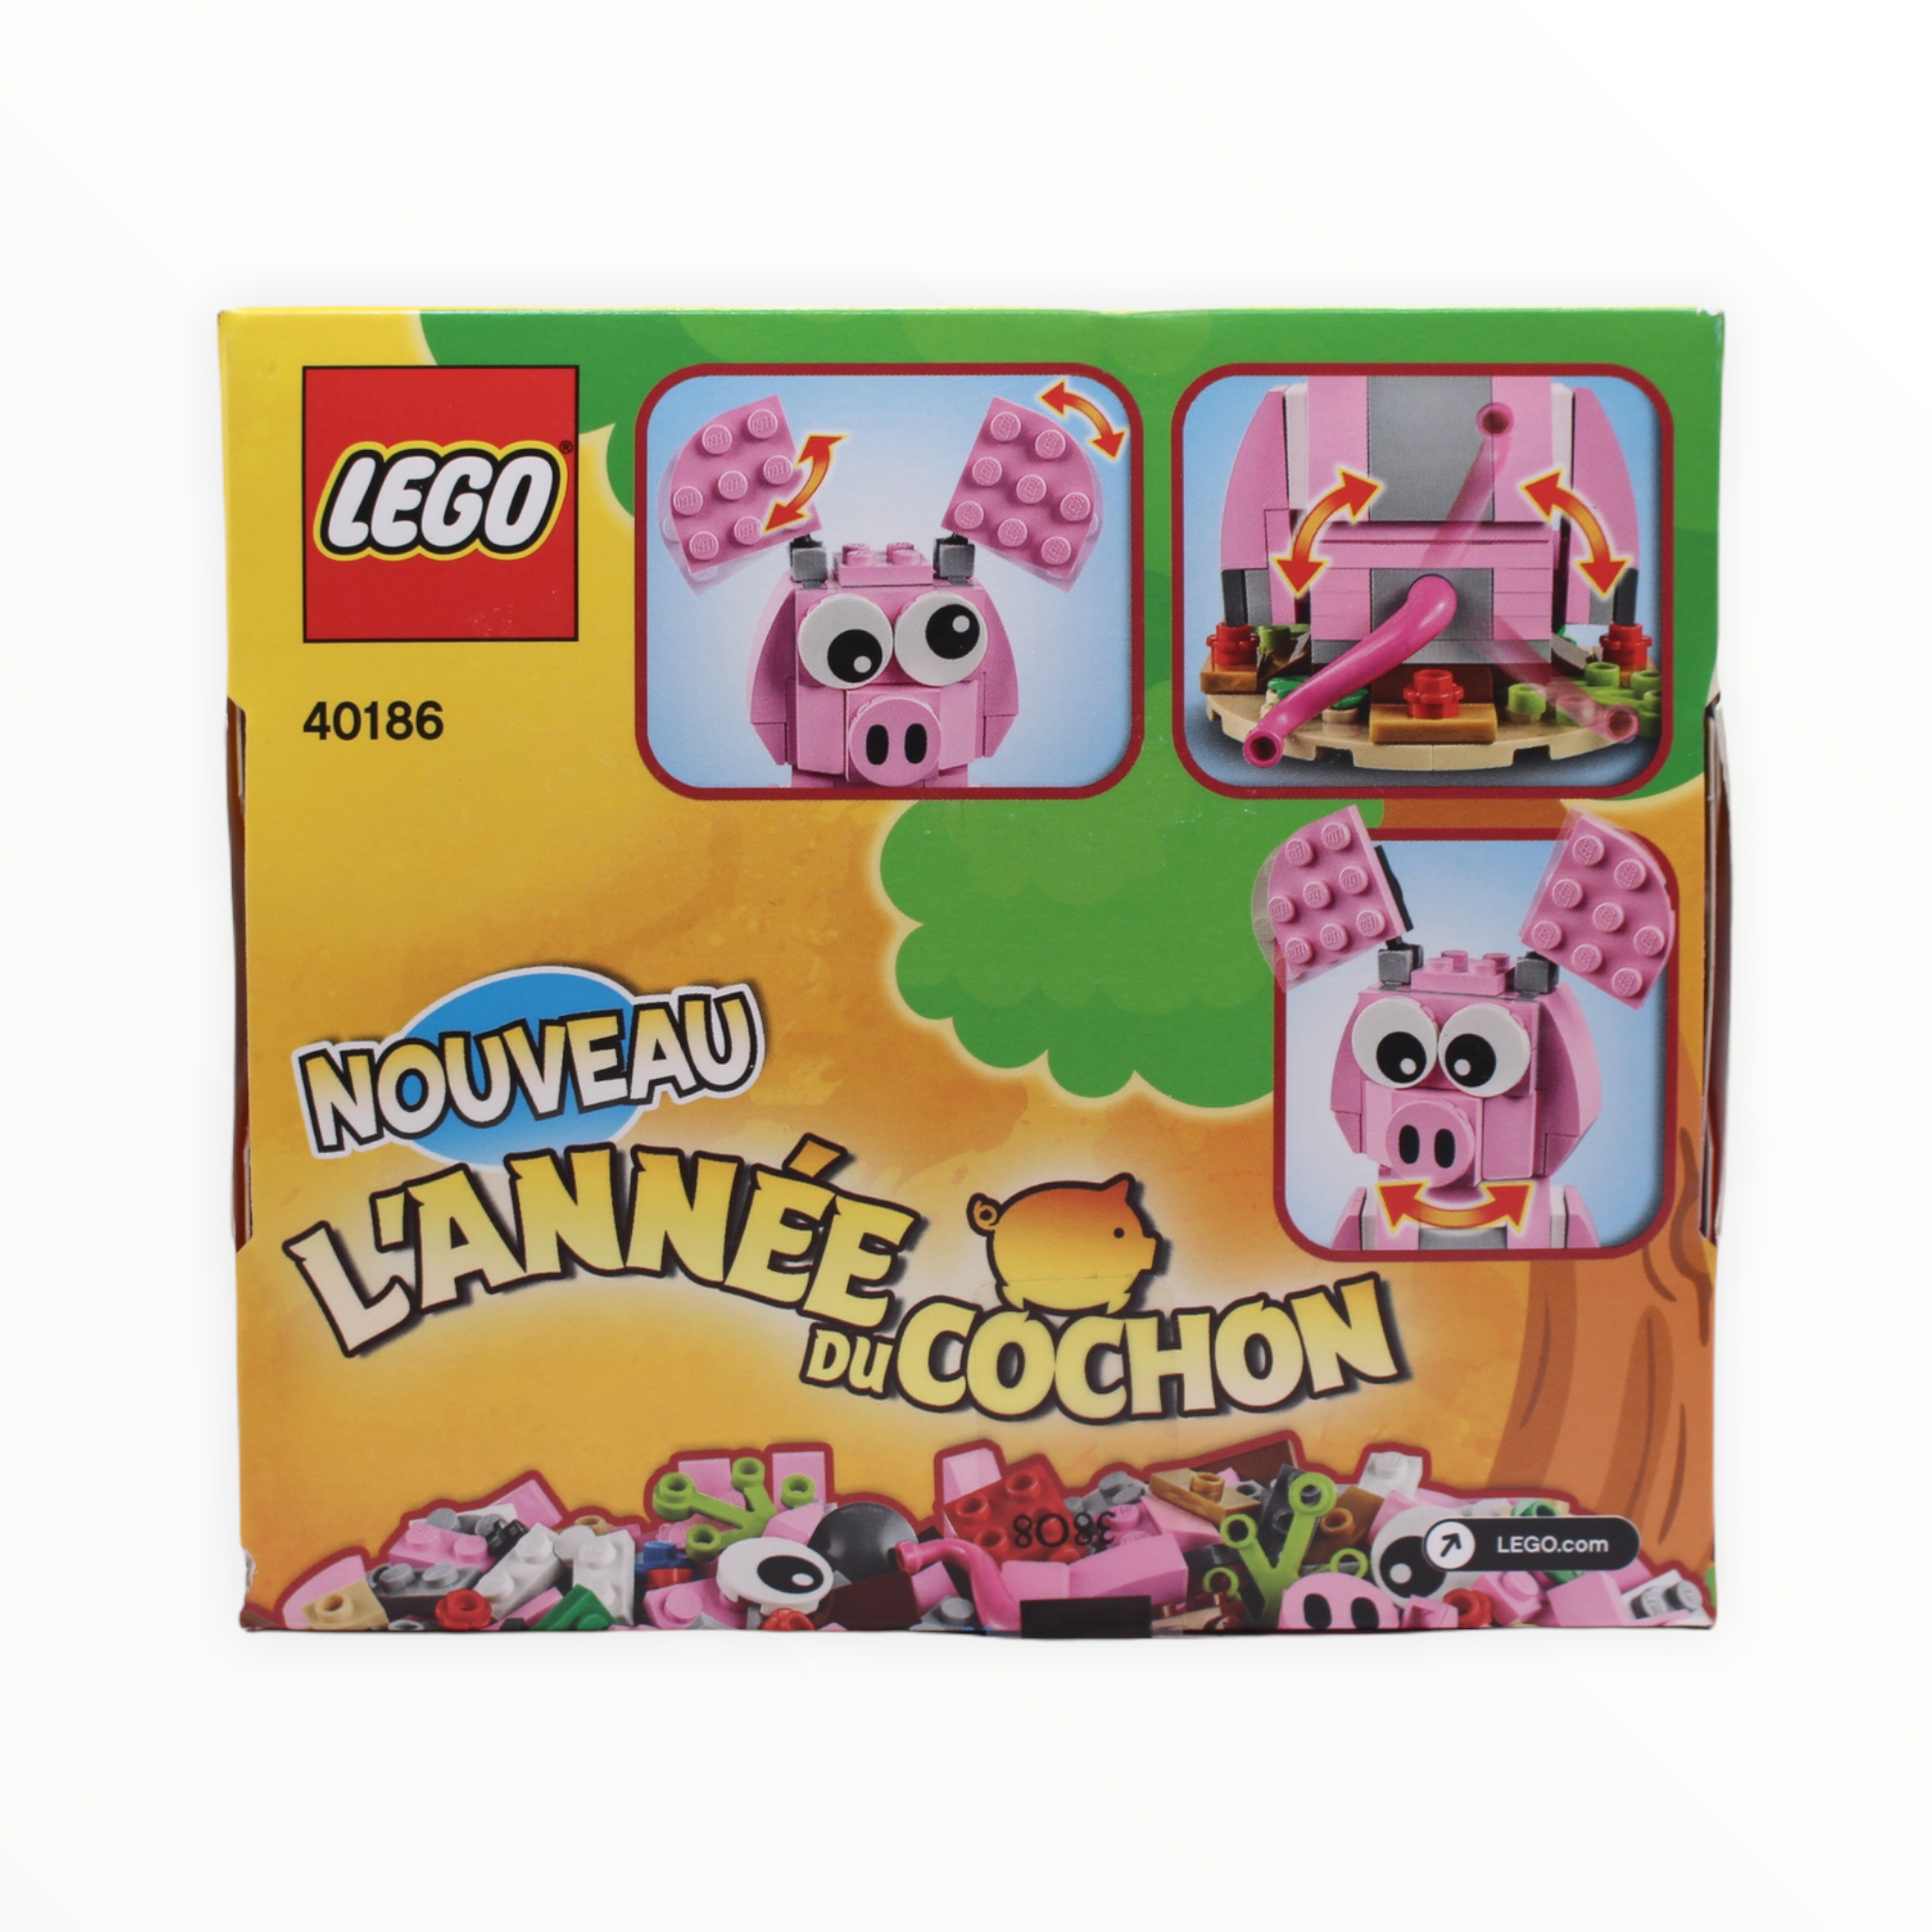 Retired Set 40186 LEGO Year of the Pig (2019)